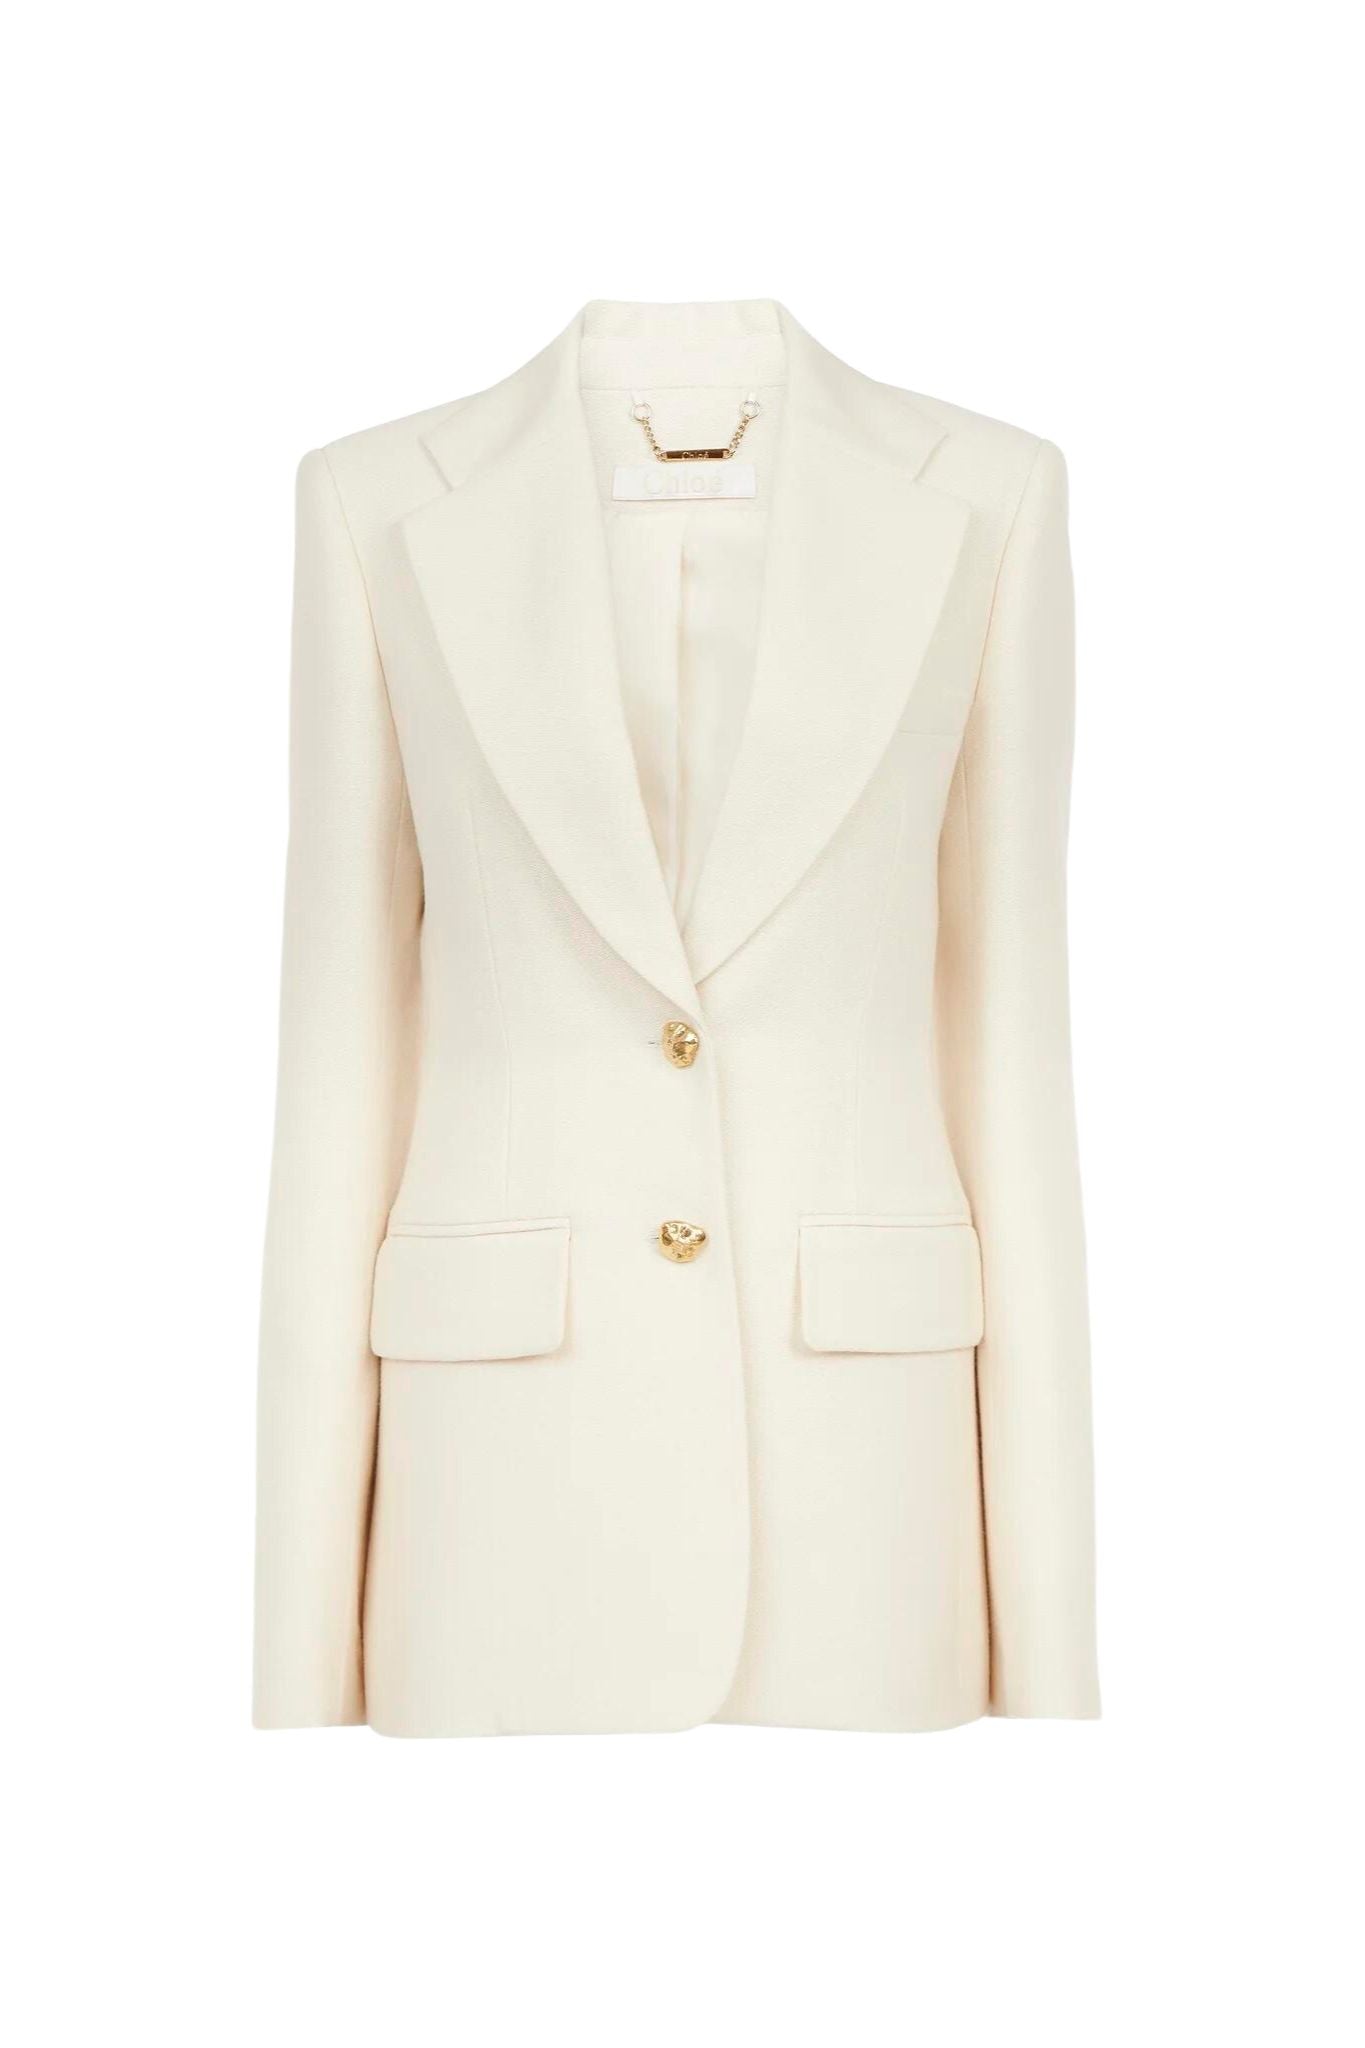 Chloe Two-Button Tailored Jacket